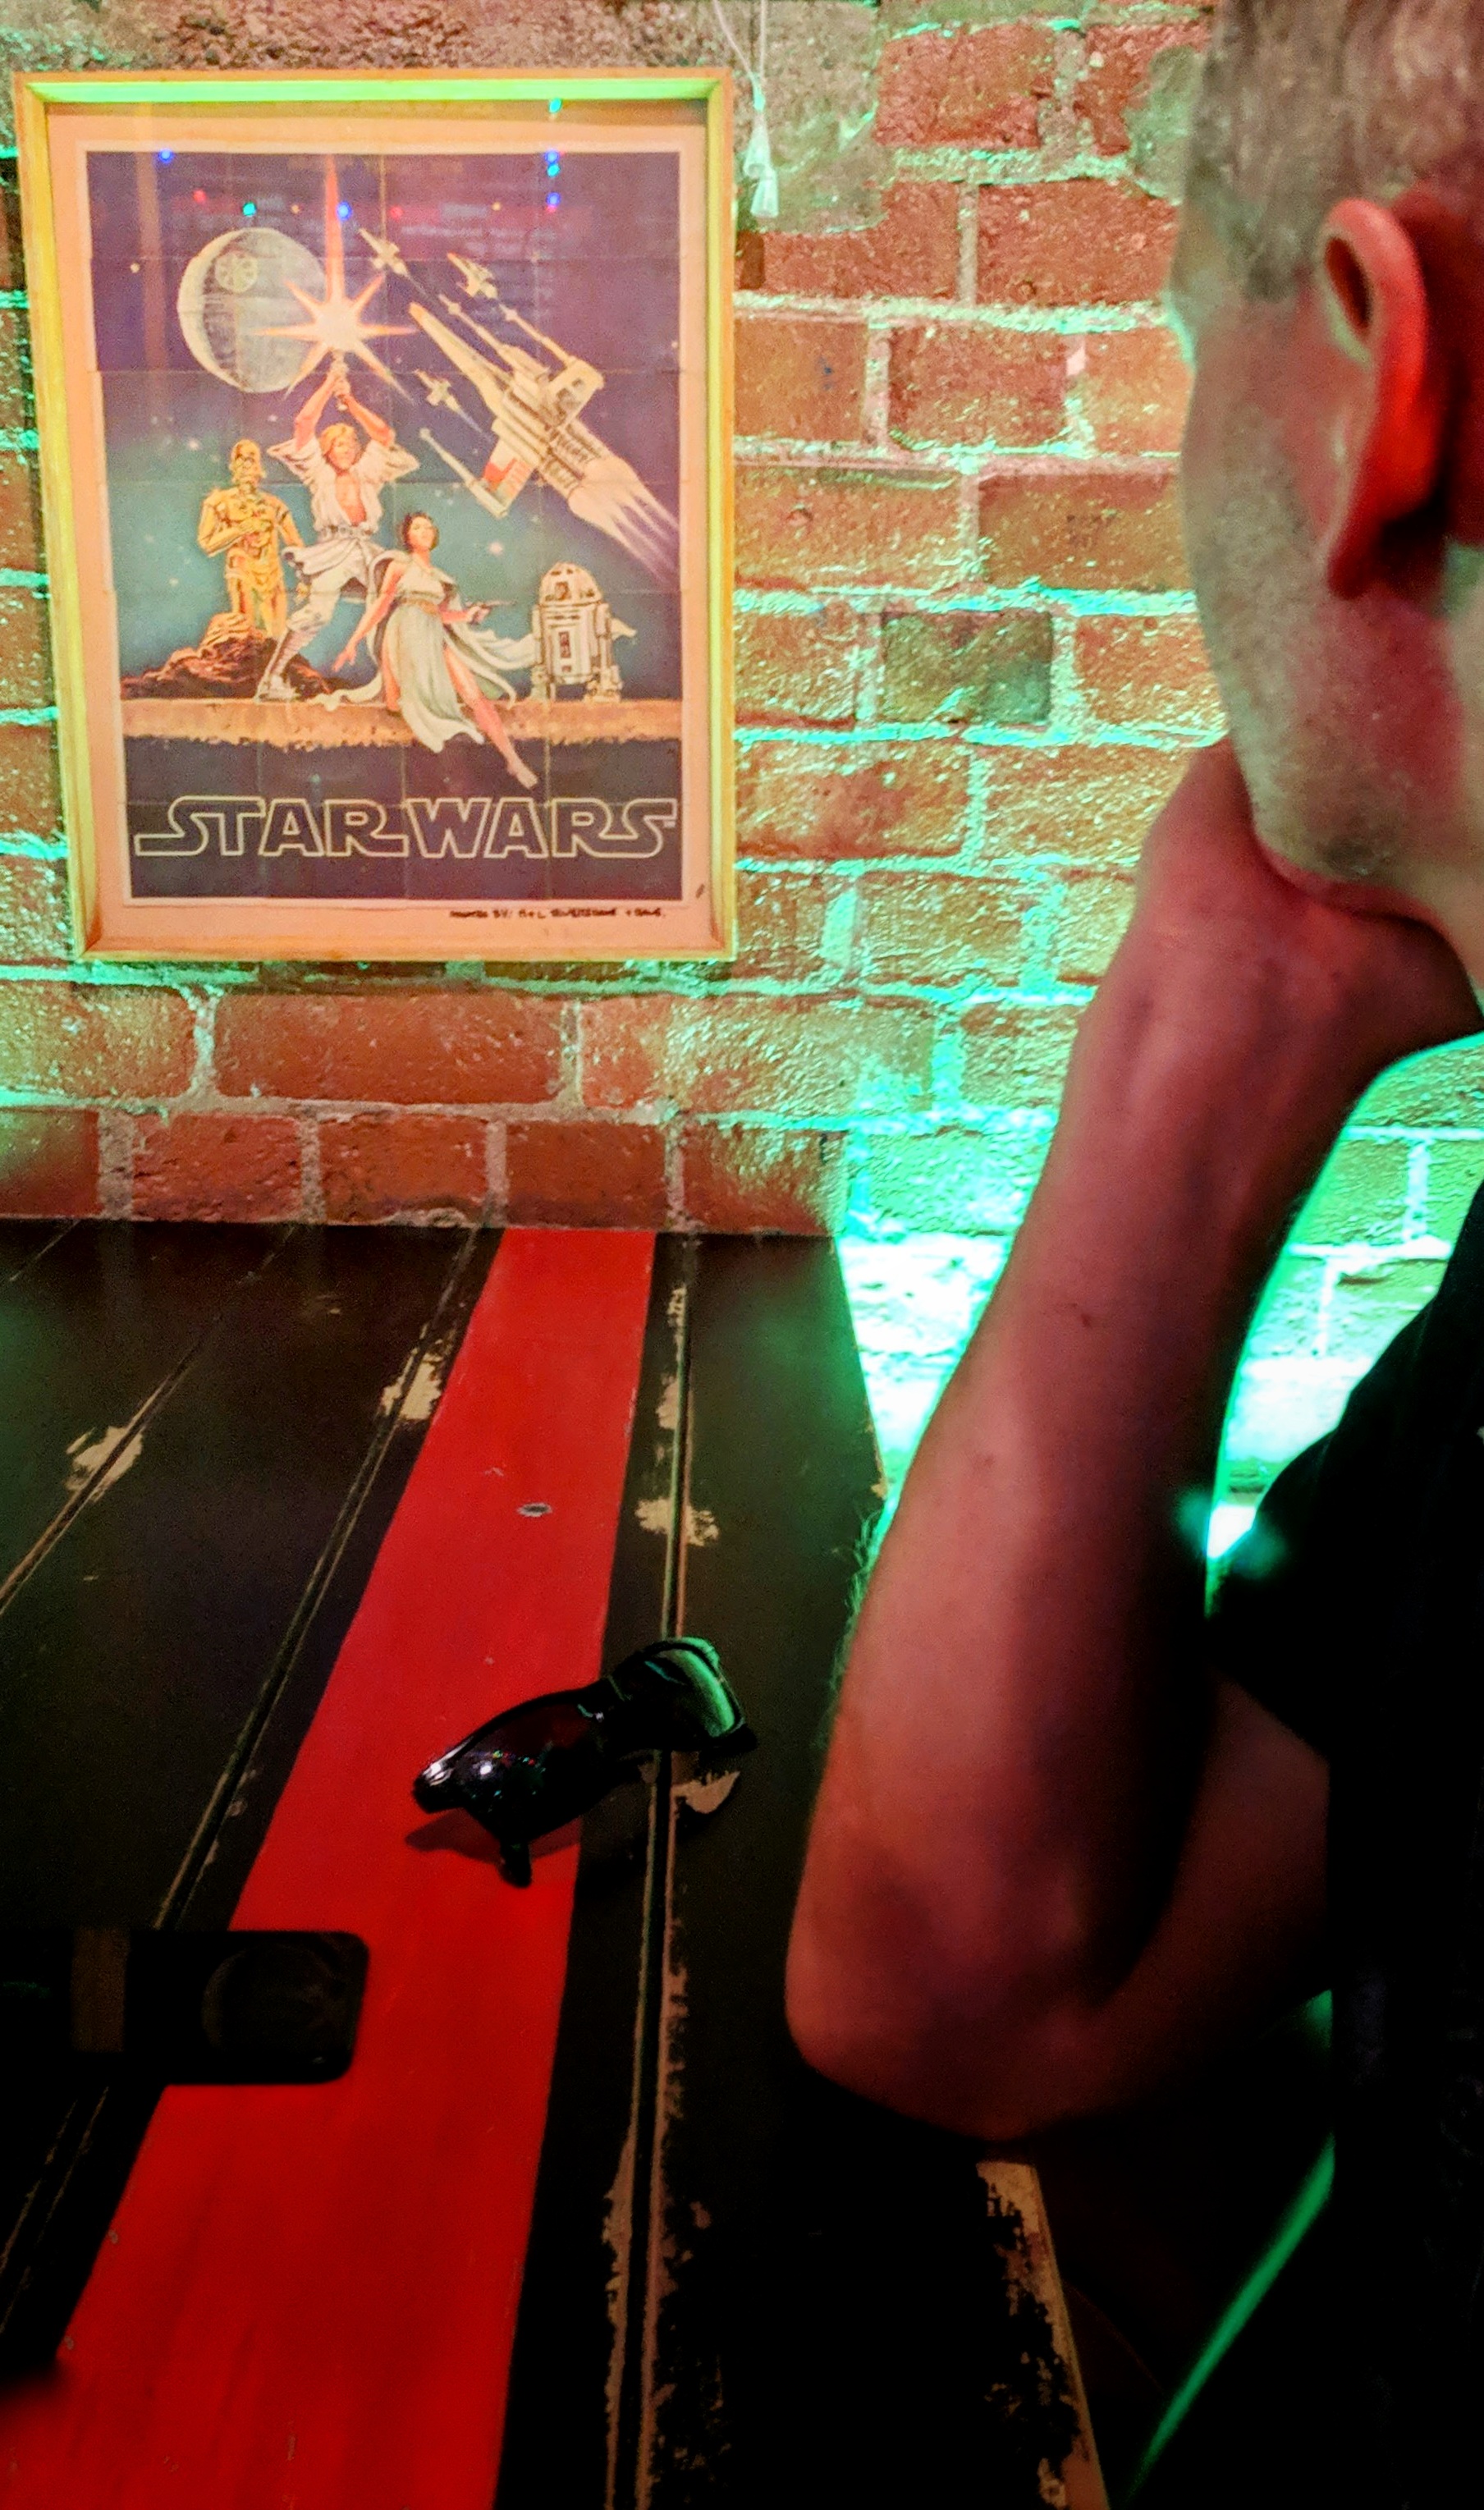 Man looks at Star Wars card poster in a bar